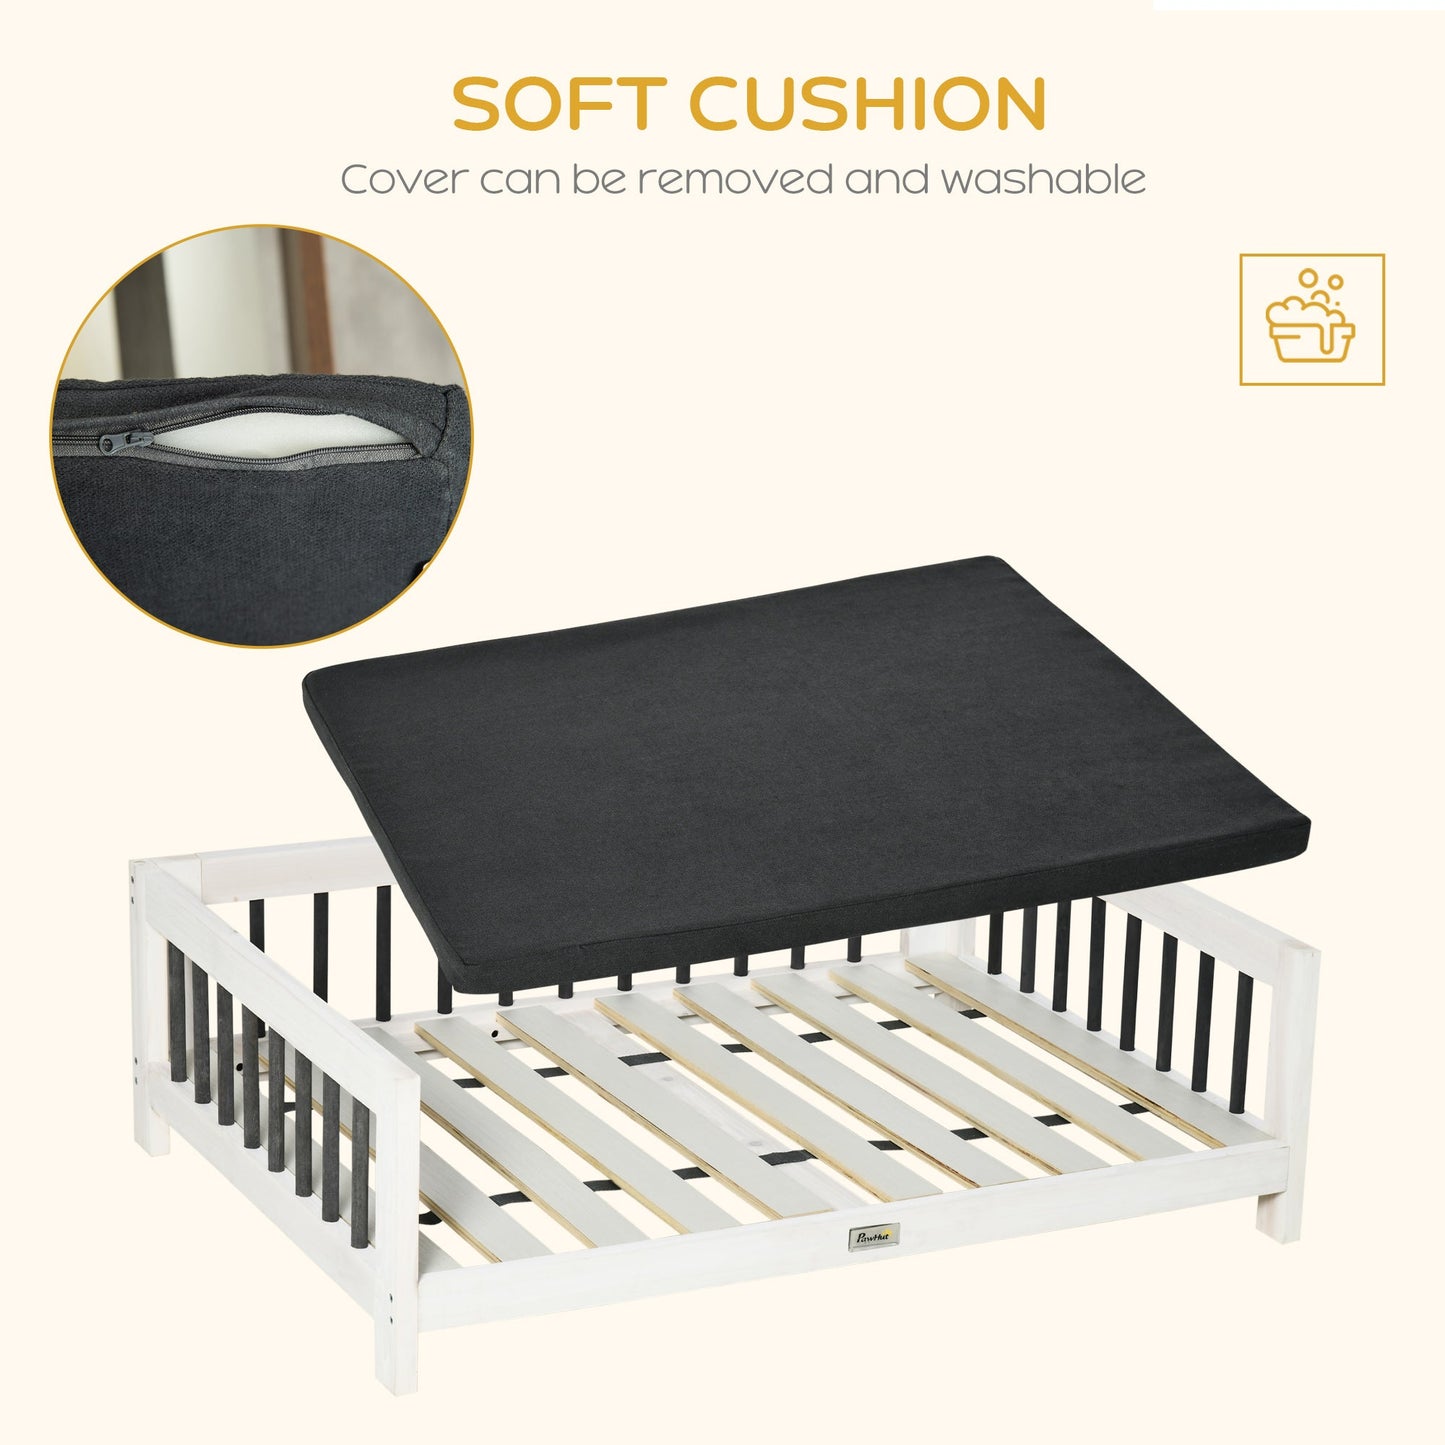 -PawHut Elevated Dog Bed, Wooden Raised Pet Sofa, Portable Cat Lounge with Soft Cushion, Washable Cover for Small, Medium Dogs and Cats, White Black - Outdoor Style Company